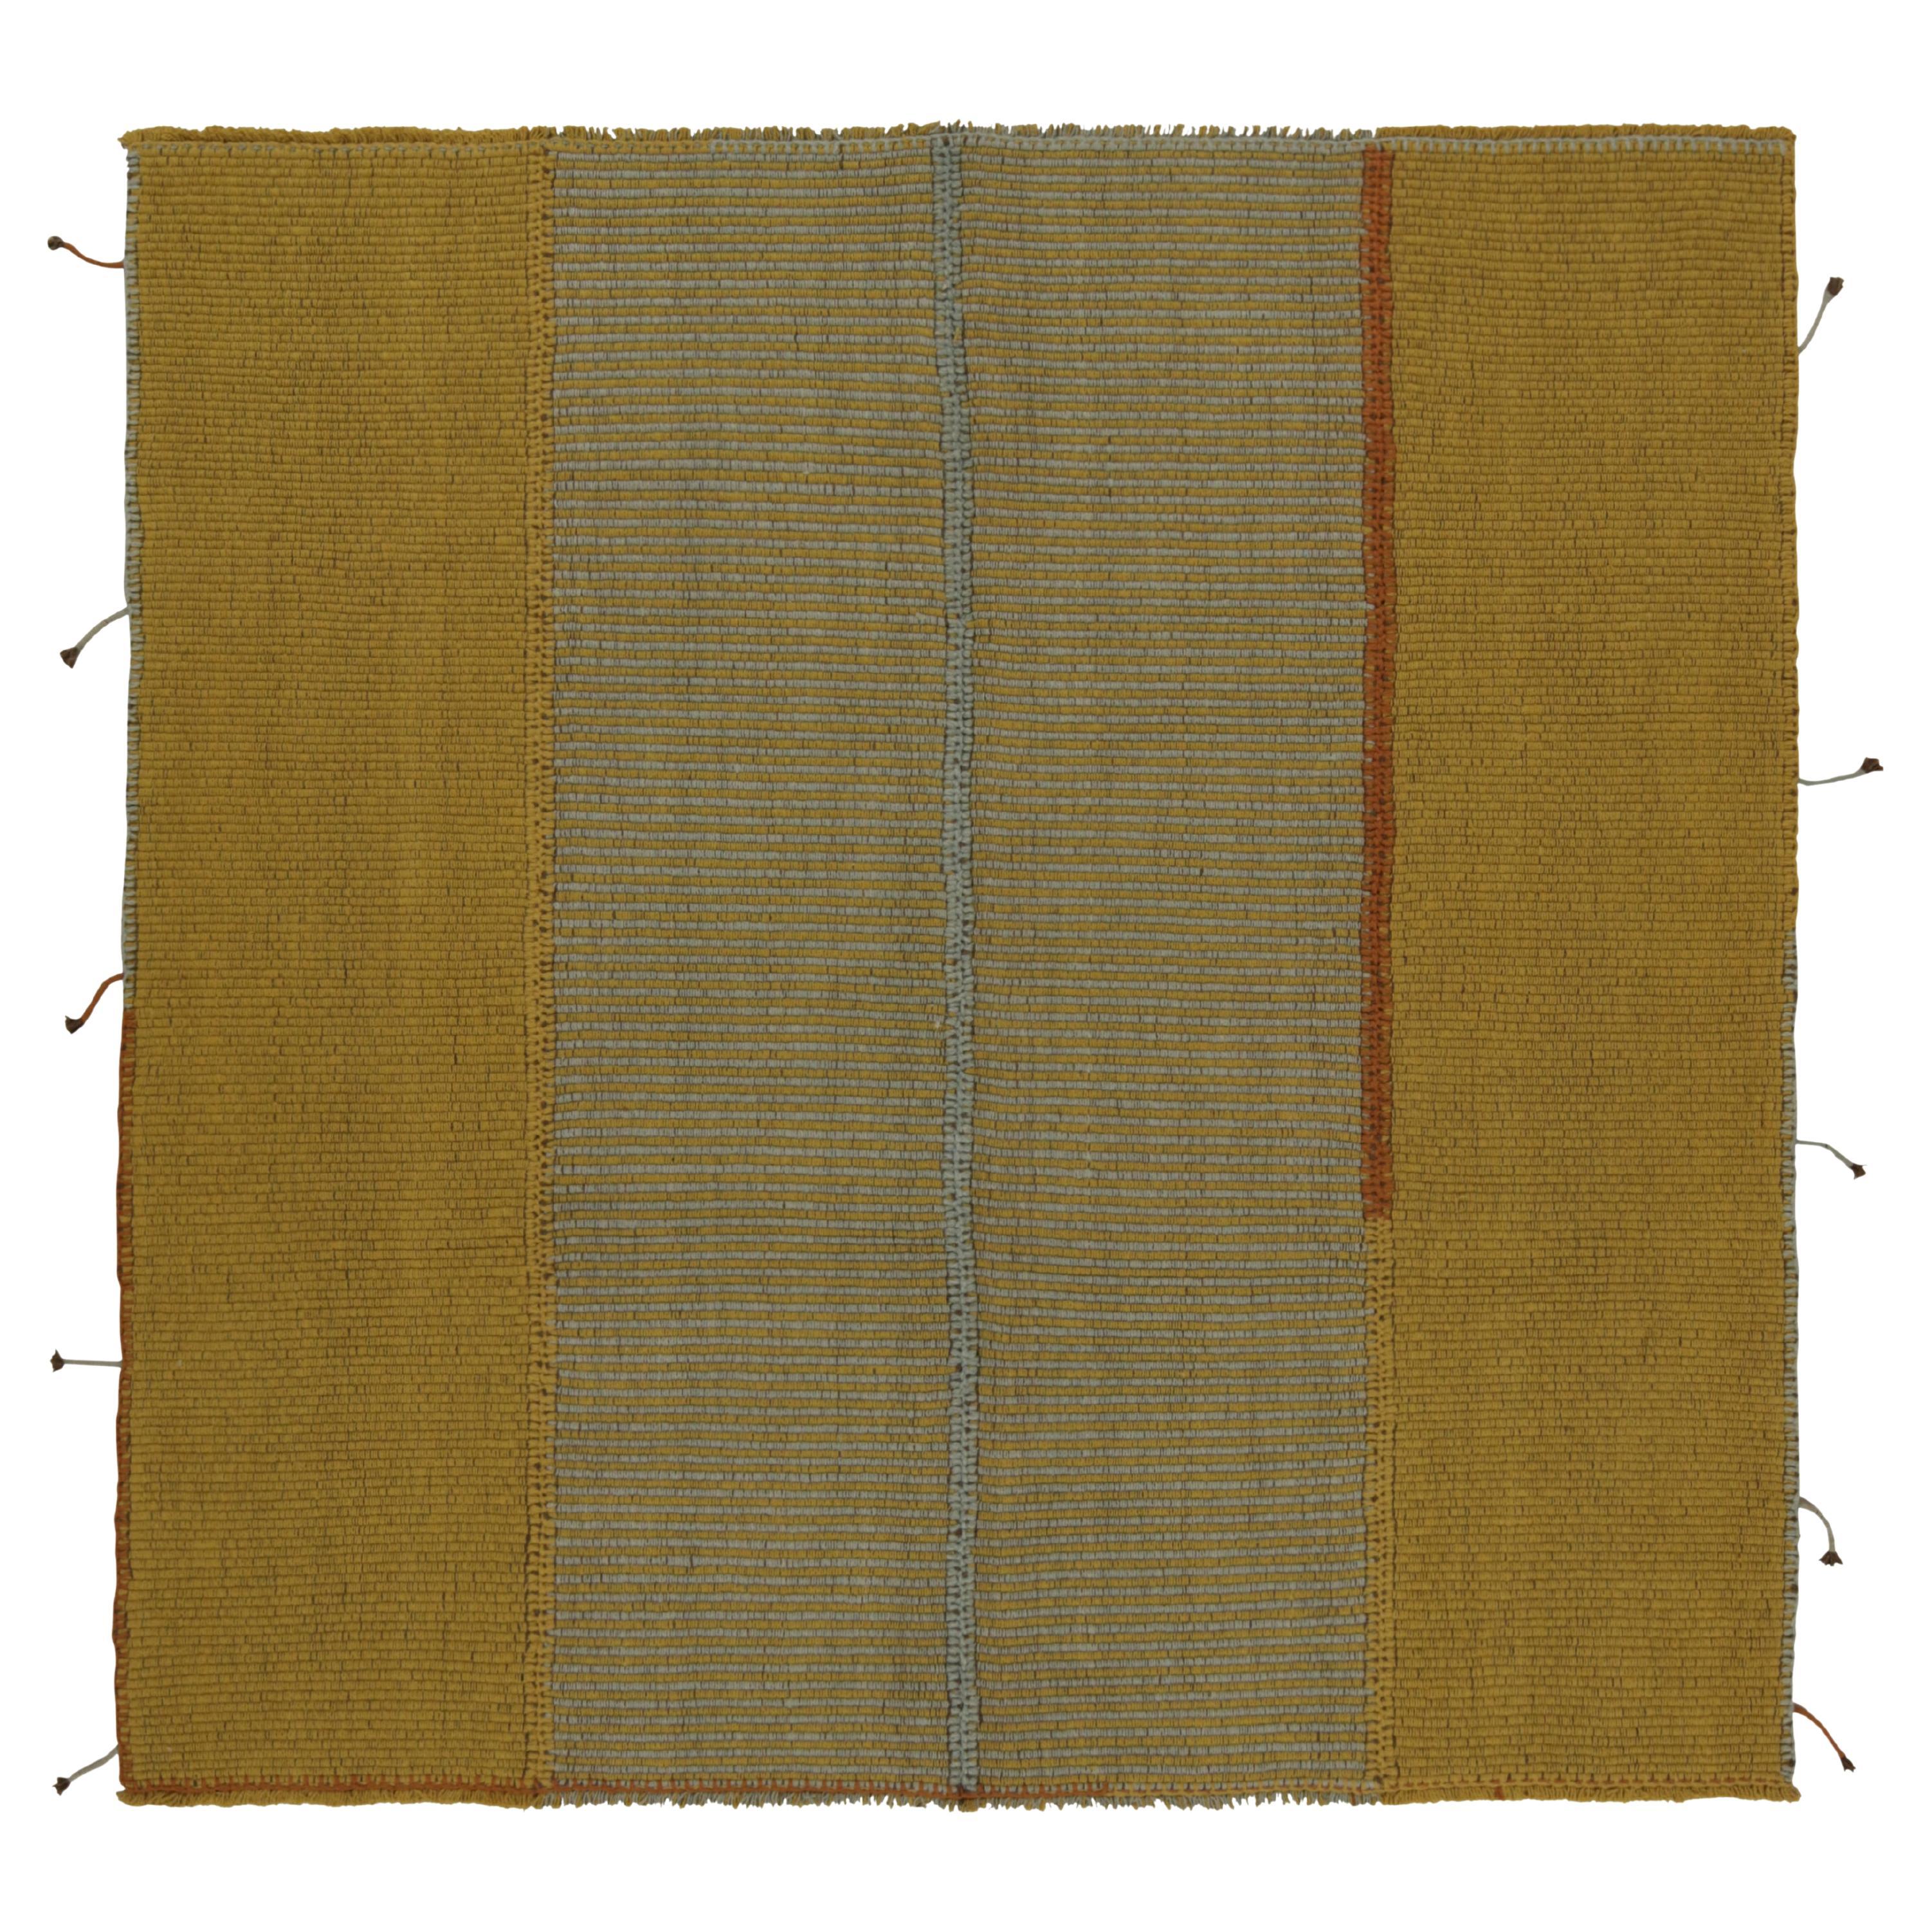 Rug & Kilim’s Contemporary Square Kilim in Ochre, Blue Stripes and Brown Accents For Sale